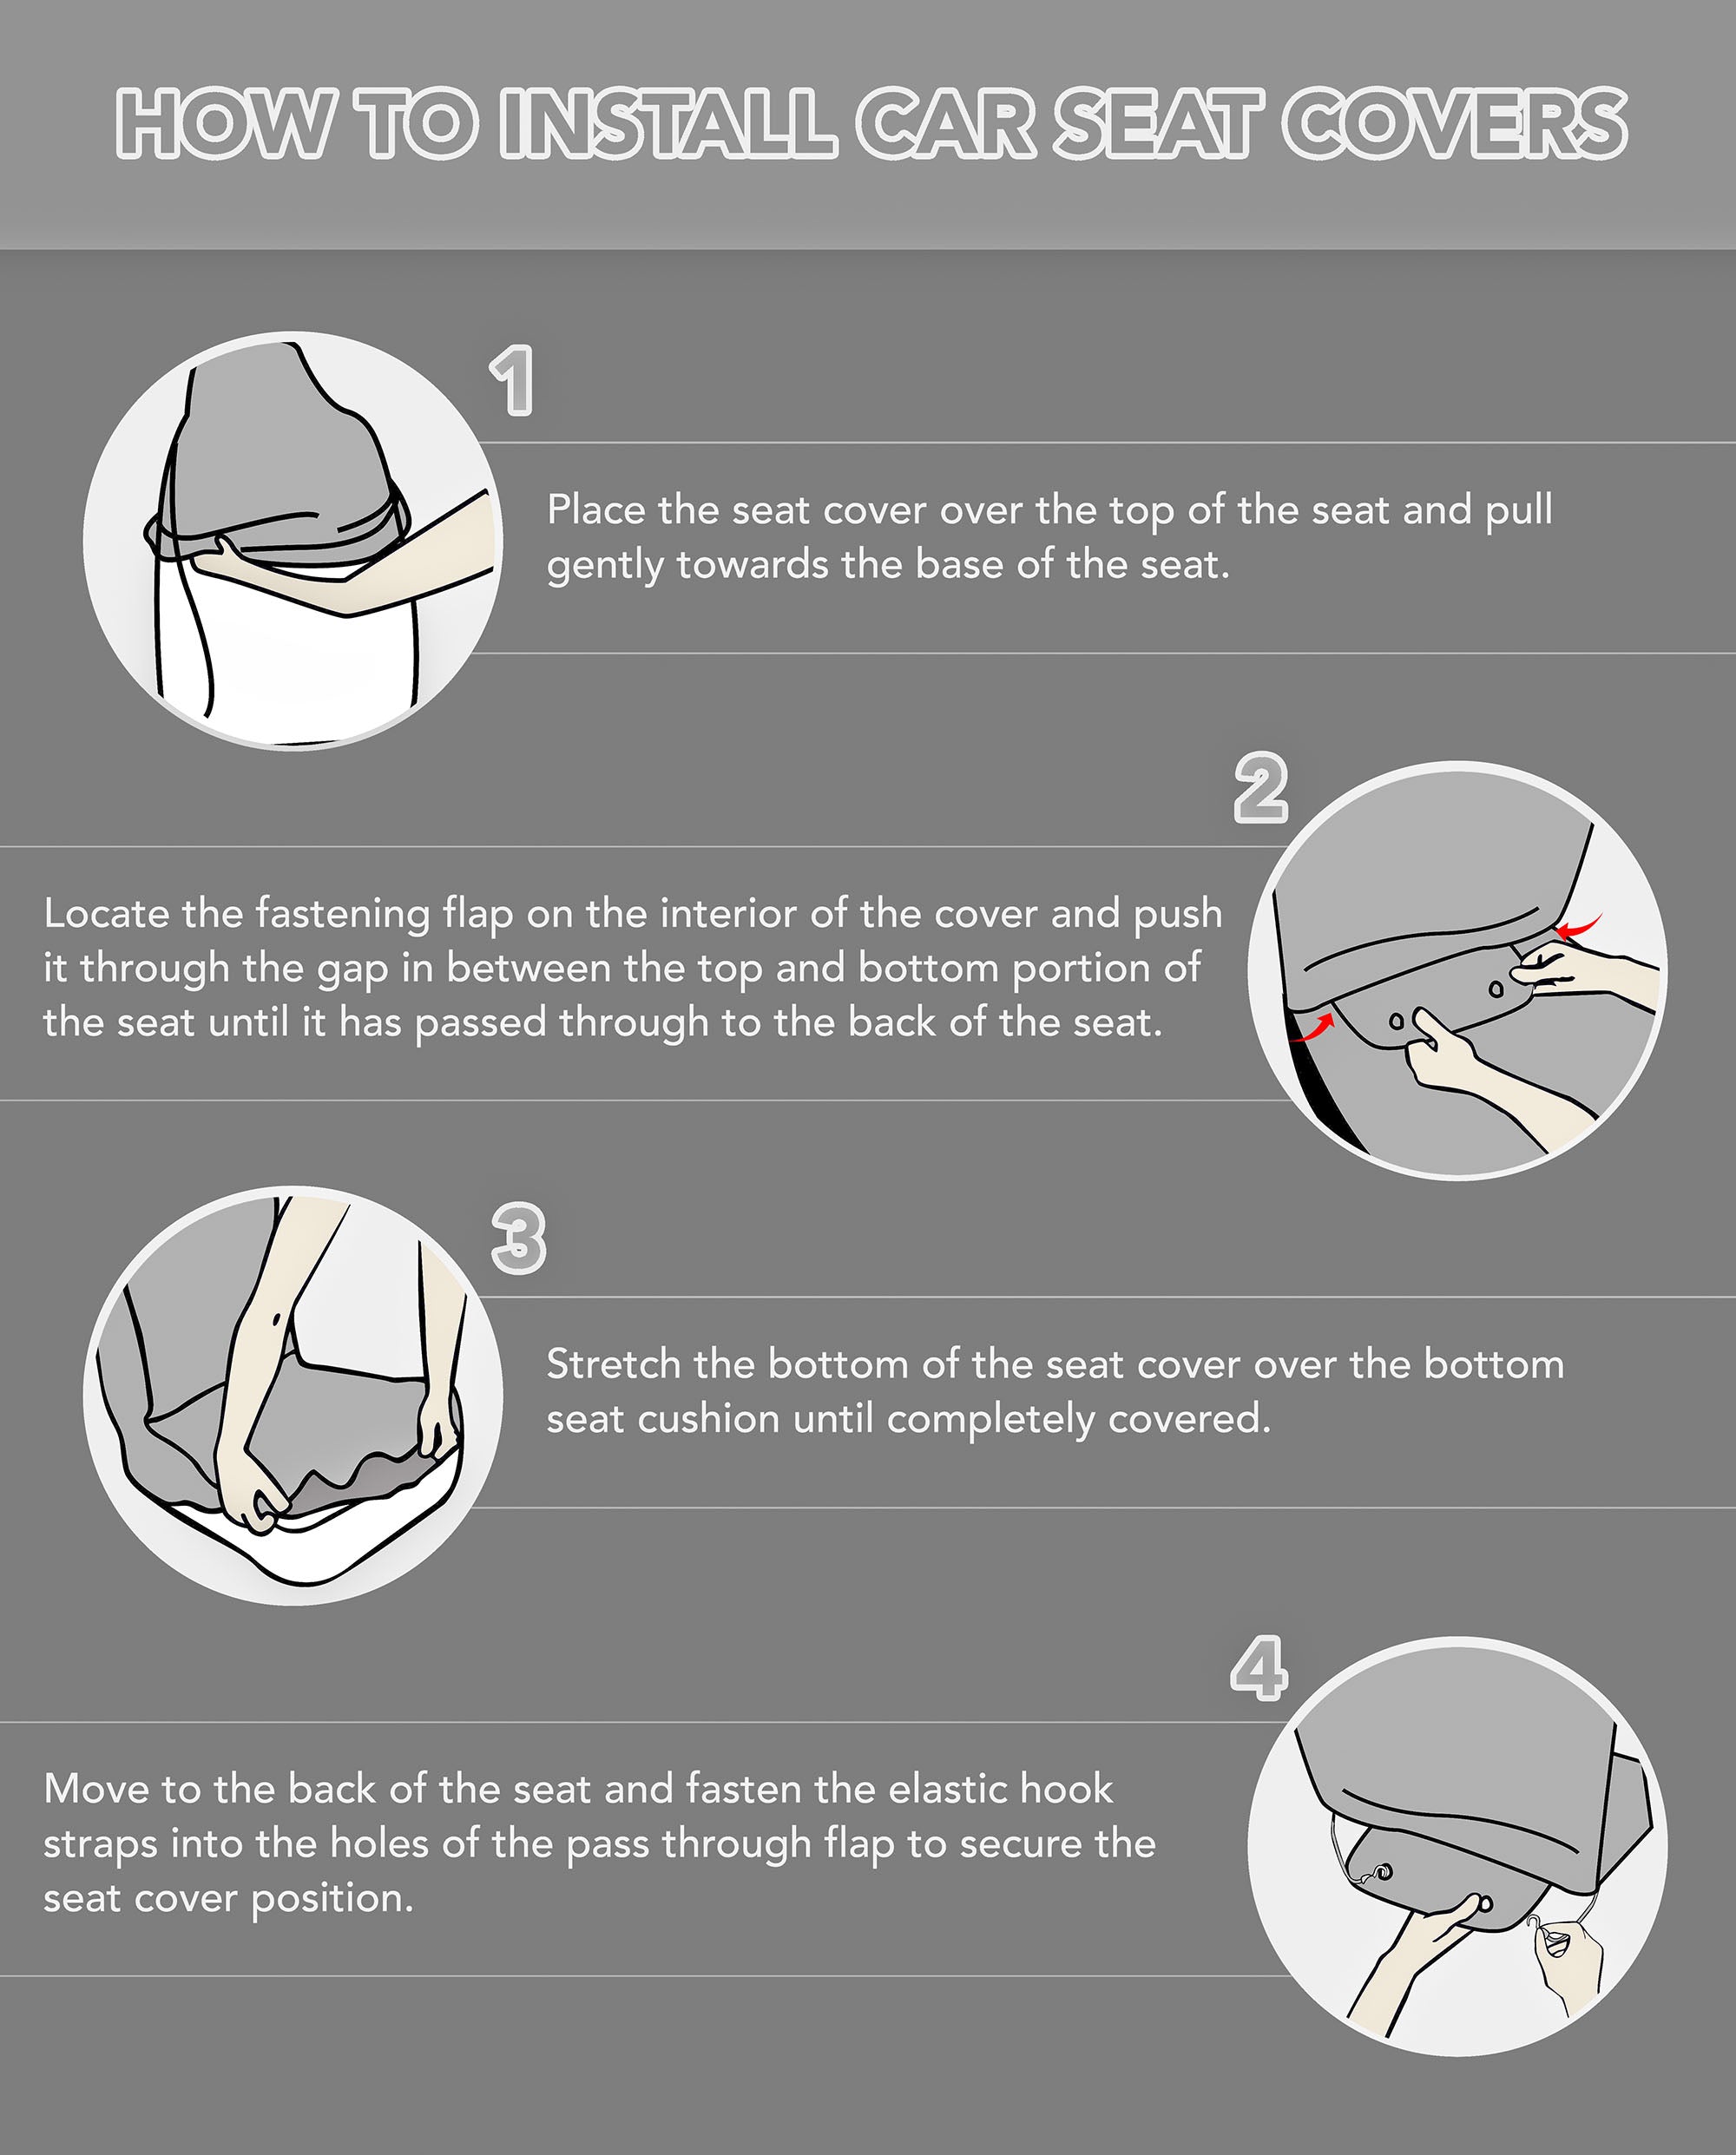 How to install Car Seat Covers